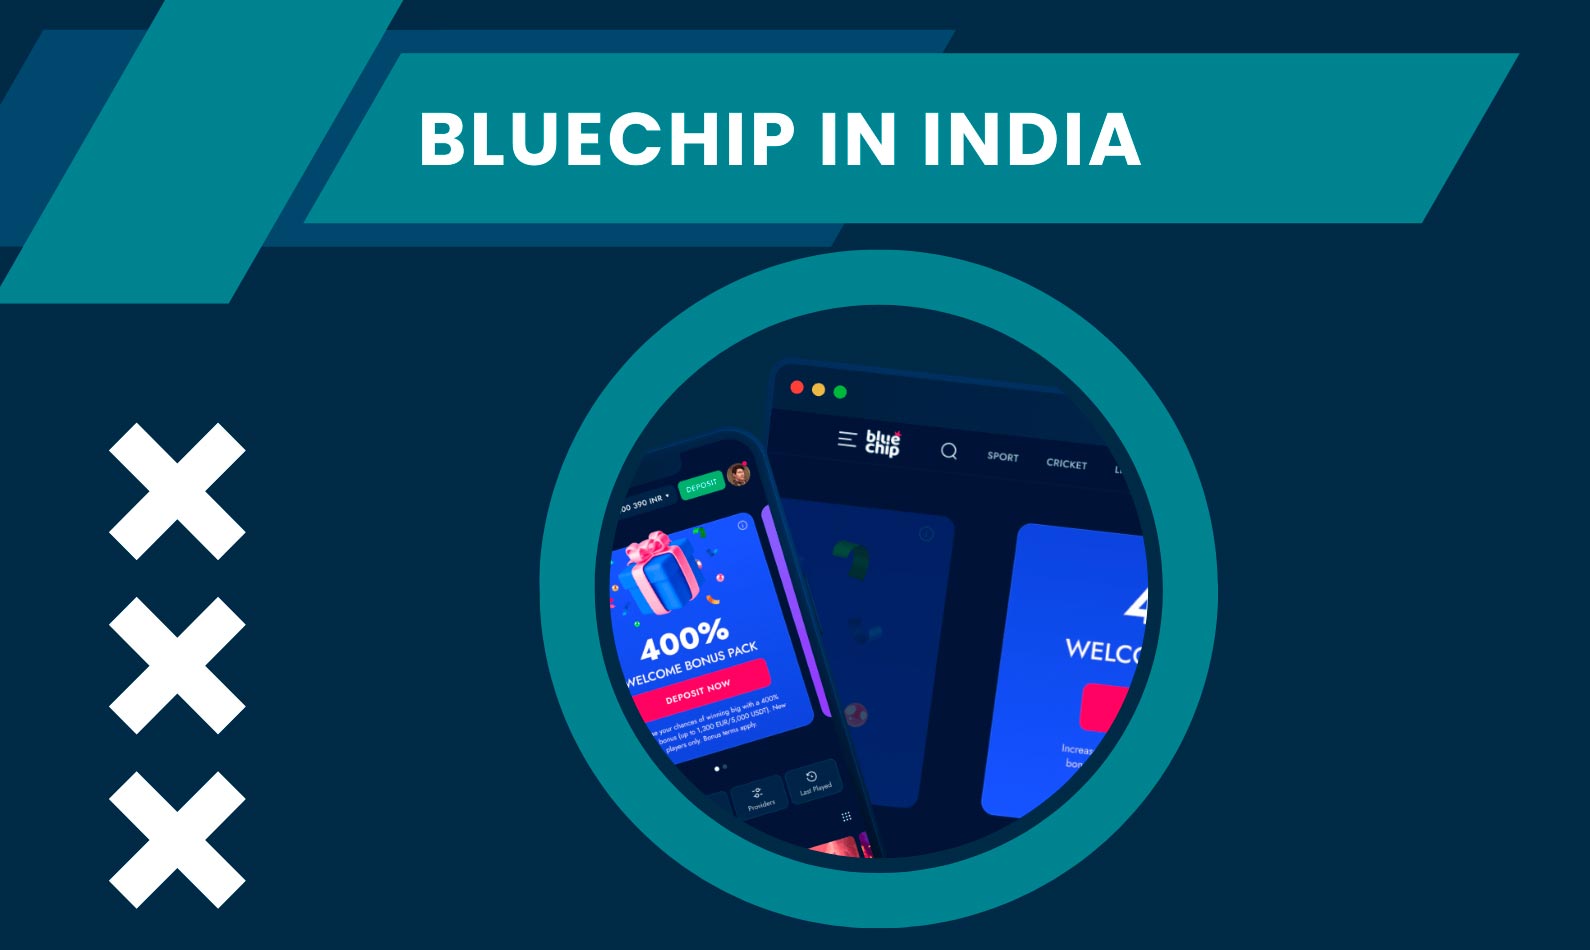 Legal site for games and betting – Bluechip in India